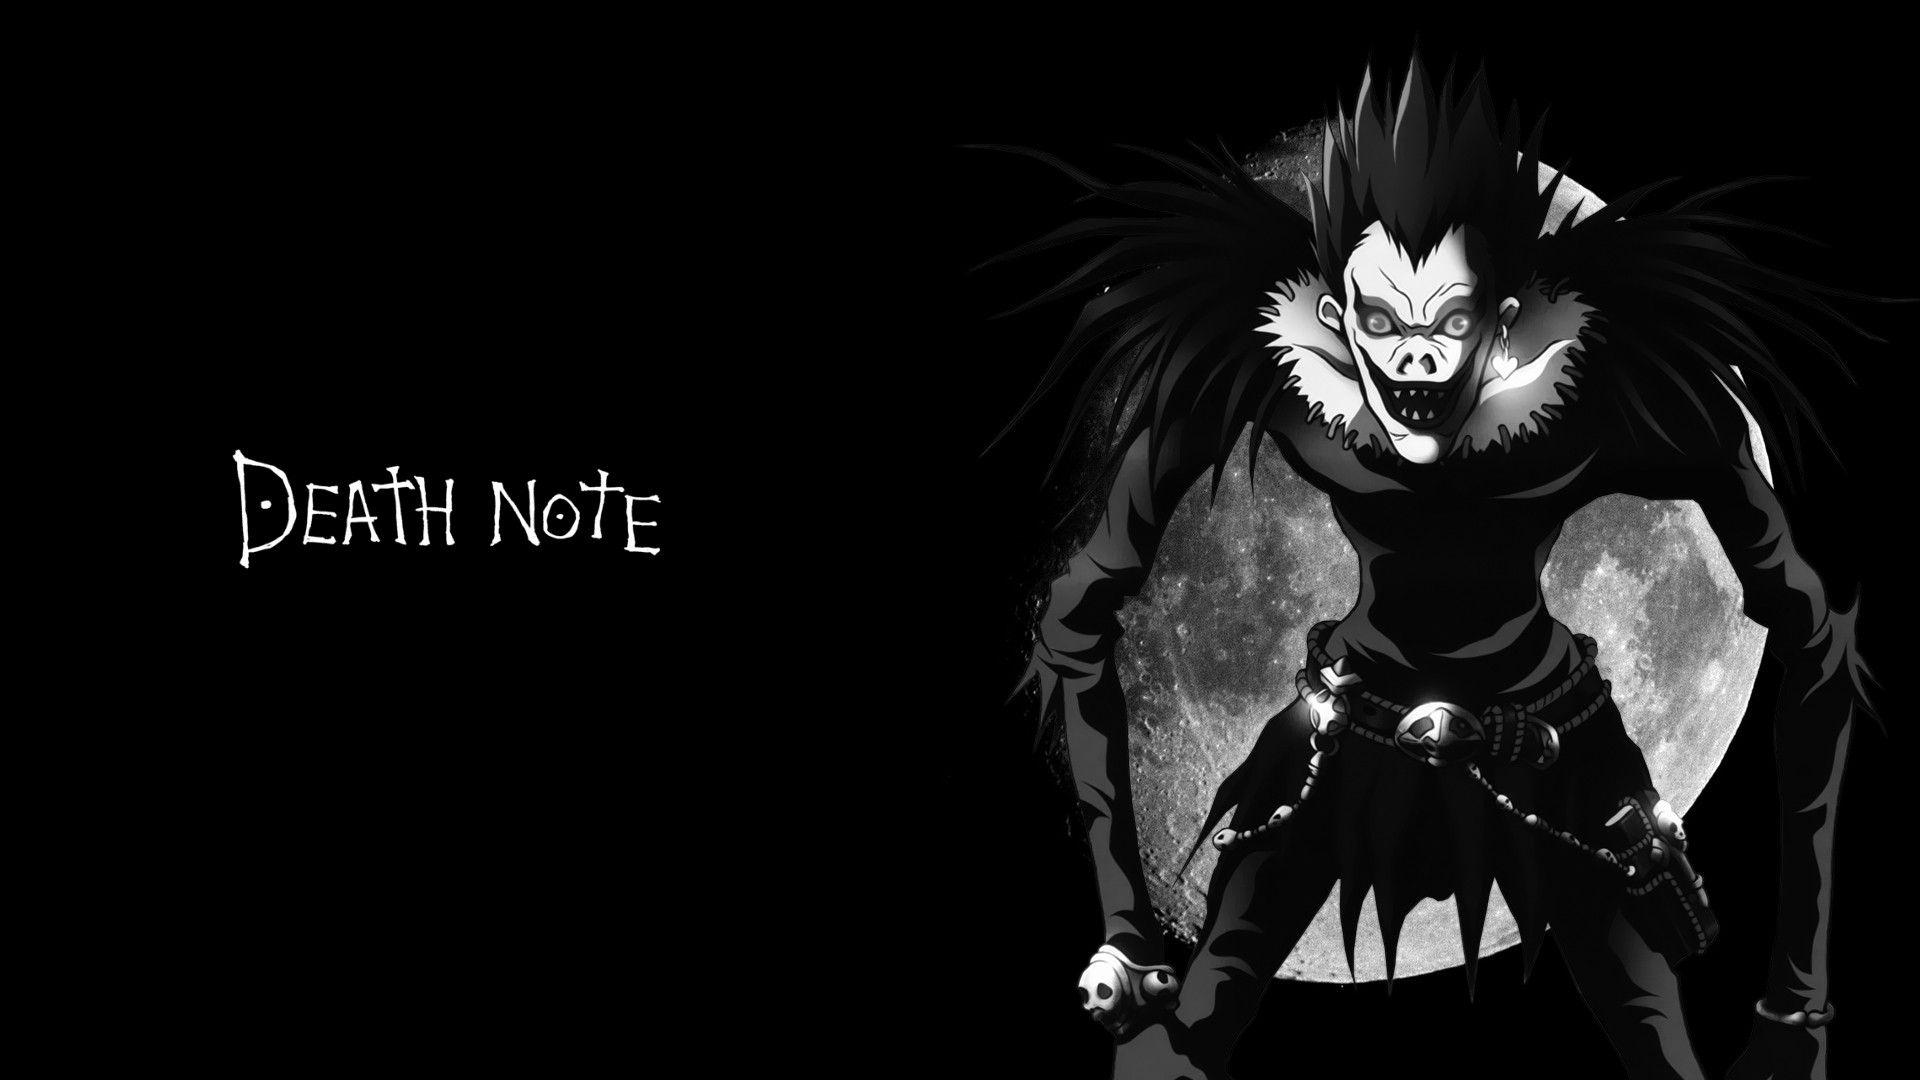 Death Note Ryuk Wallpapers Top Free Death Note Ryuk Backgrounds Wallpaperaccess Feel free to share with your friends and family. death note ryuk wallpapers top free